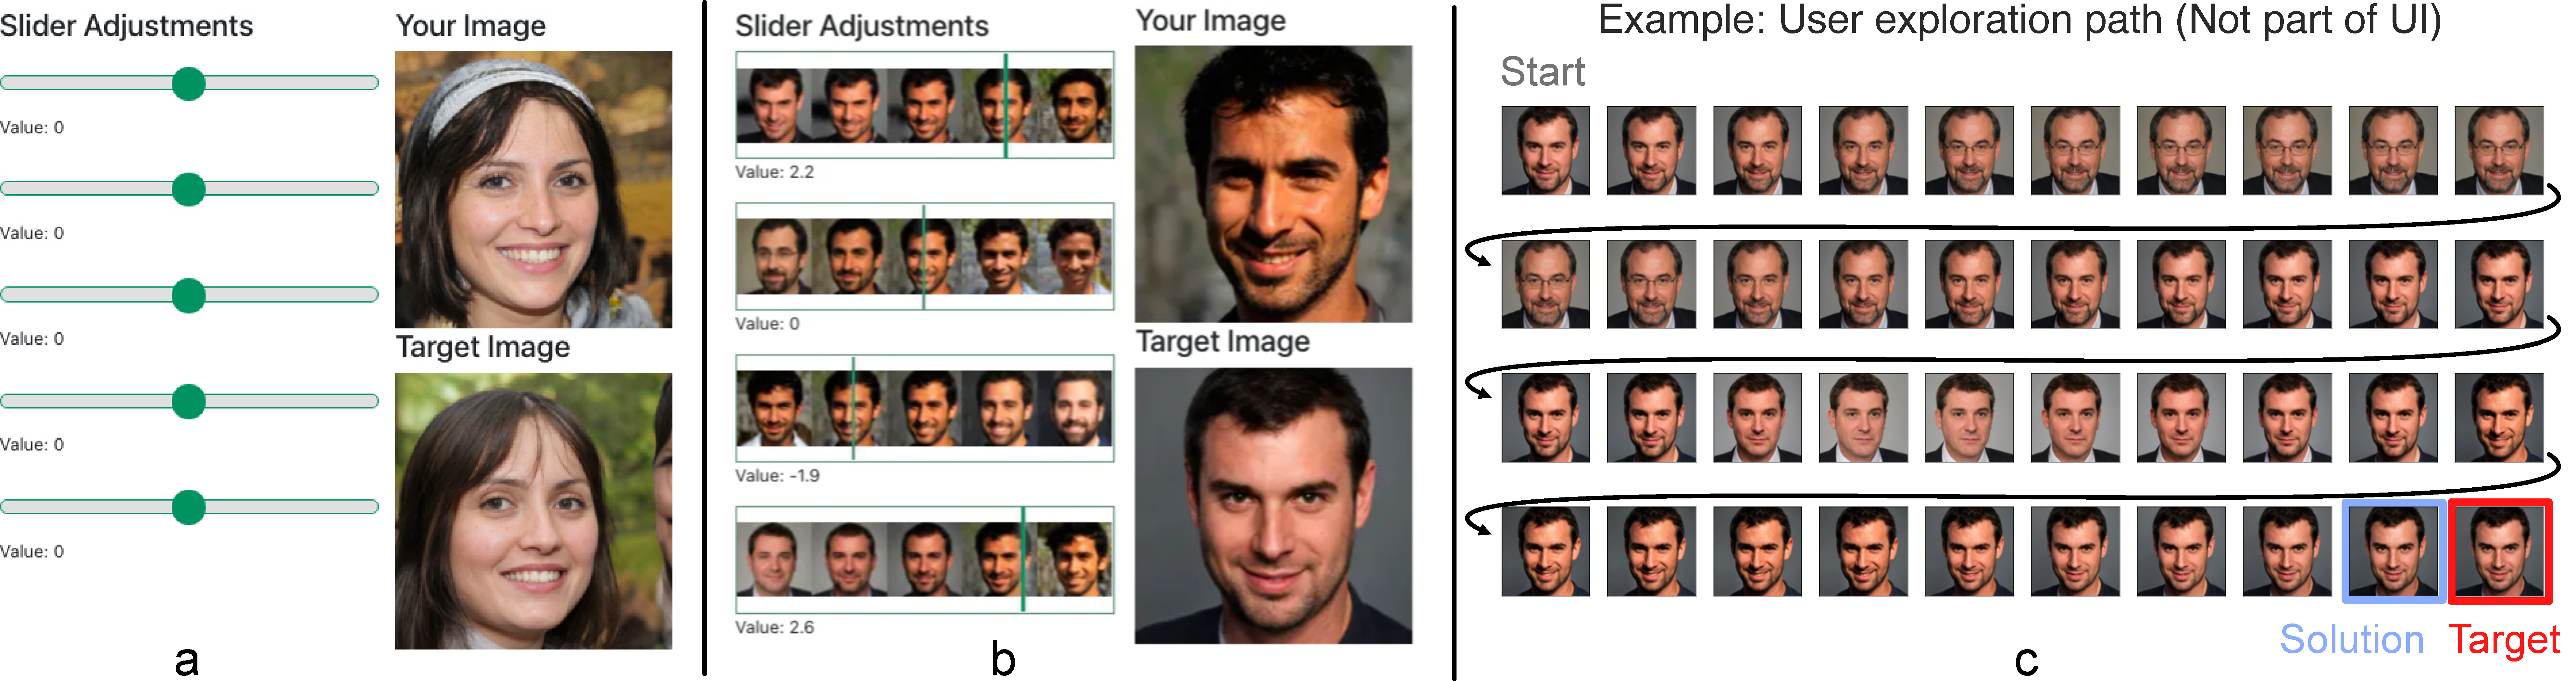 GANSlider: How Users Control Generative Models for Images using Multiple Sliders with and without Feedforward Information